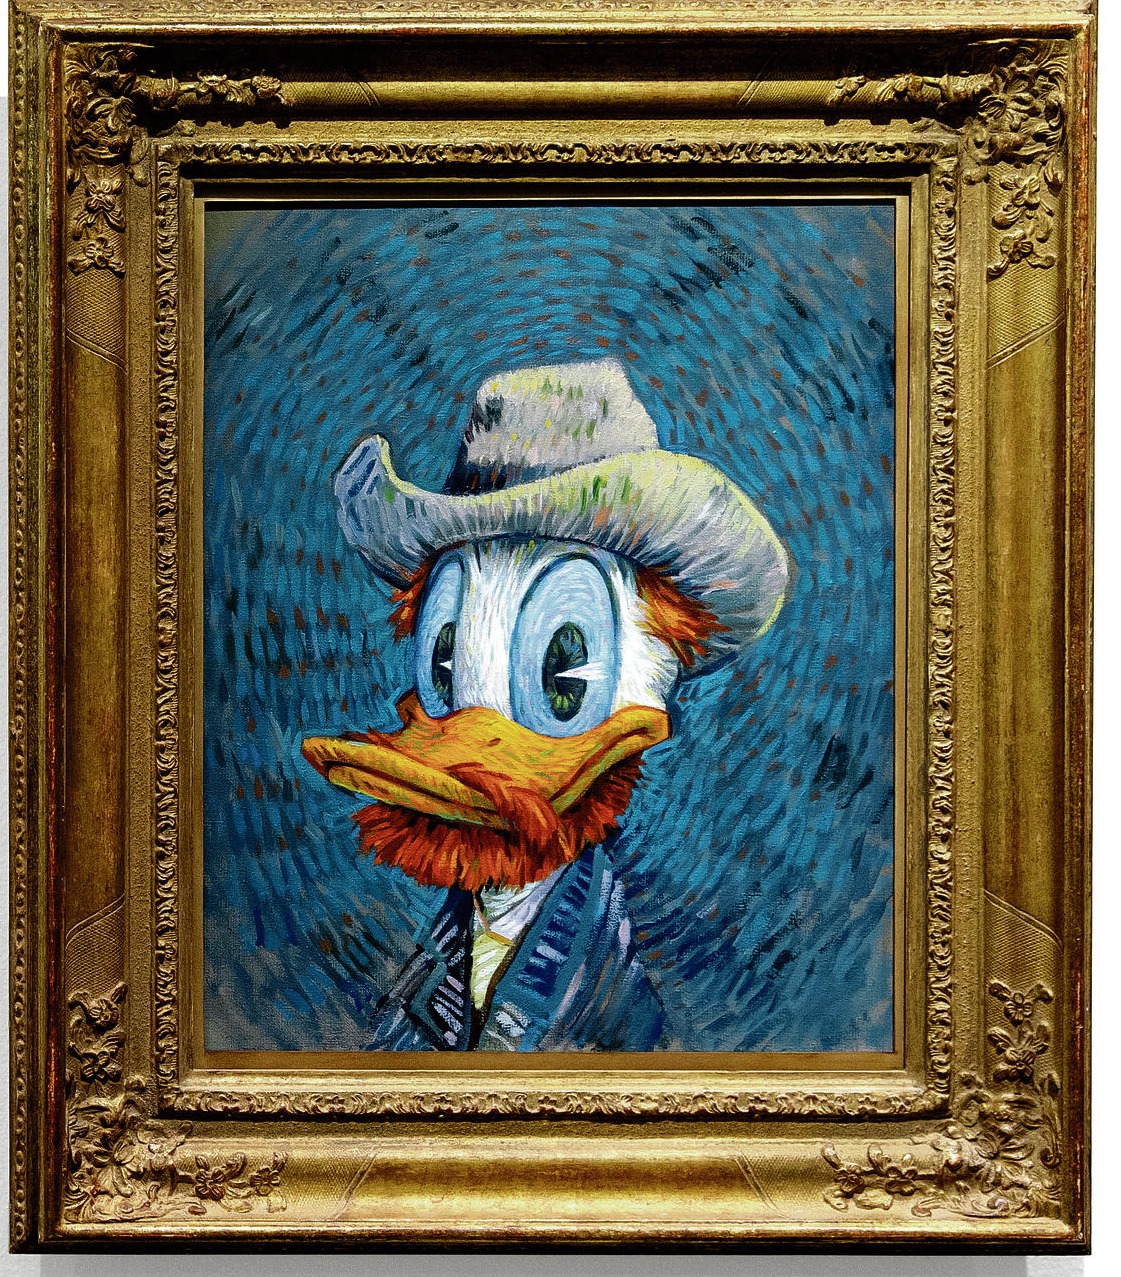 Wouter Tulp's Donald Duck Painting